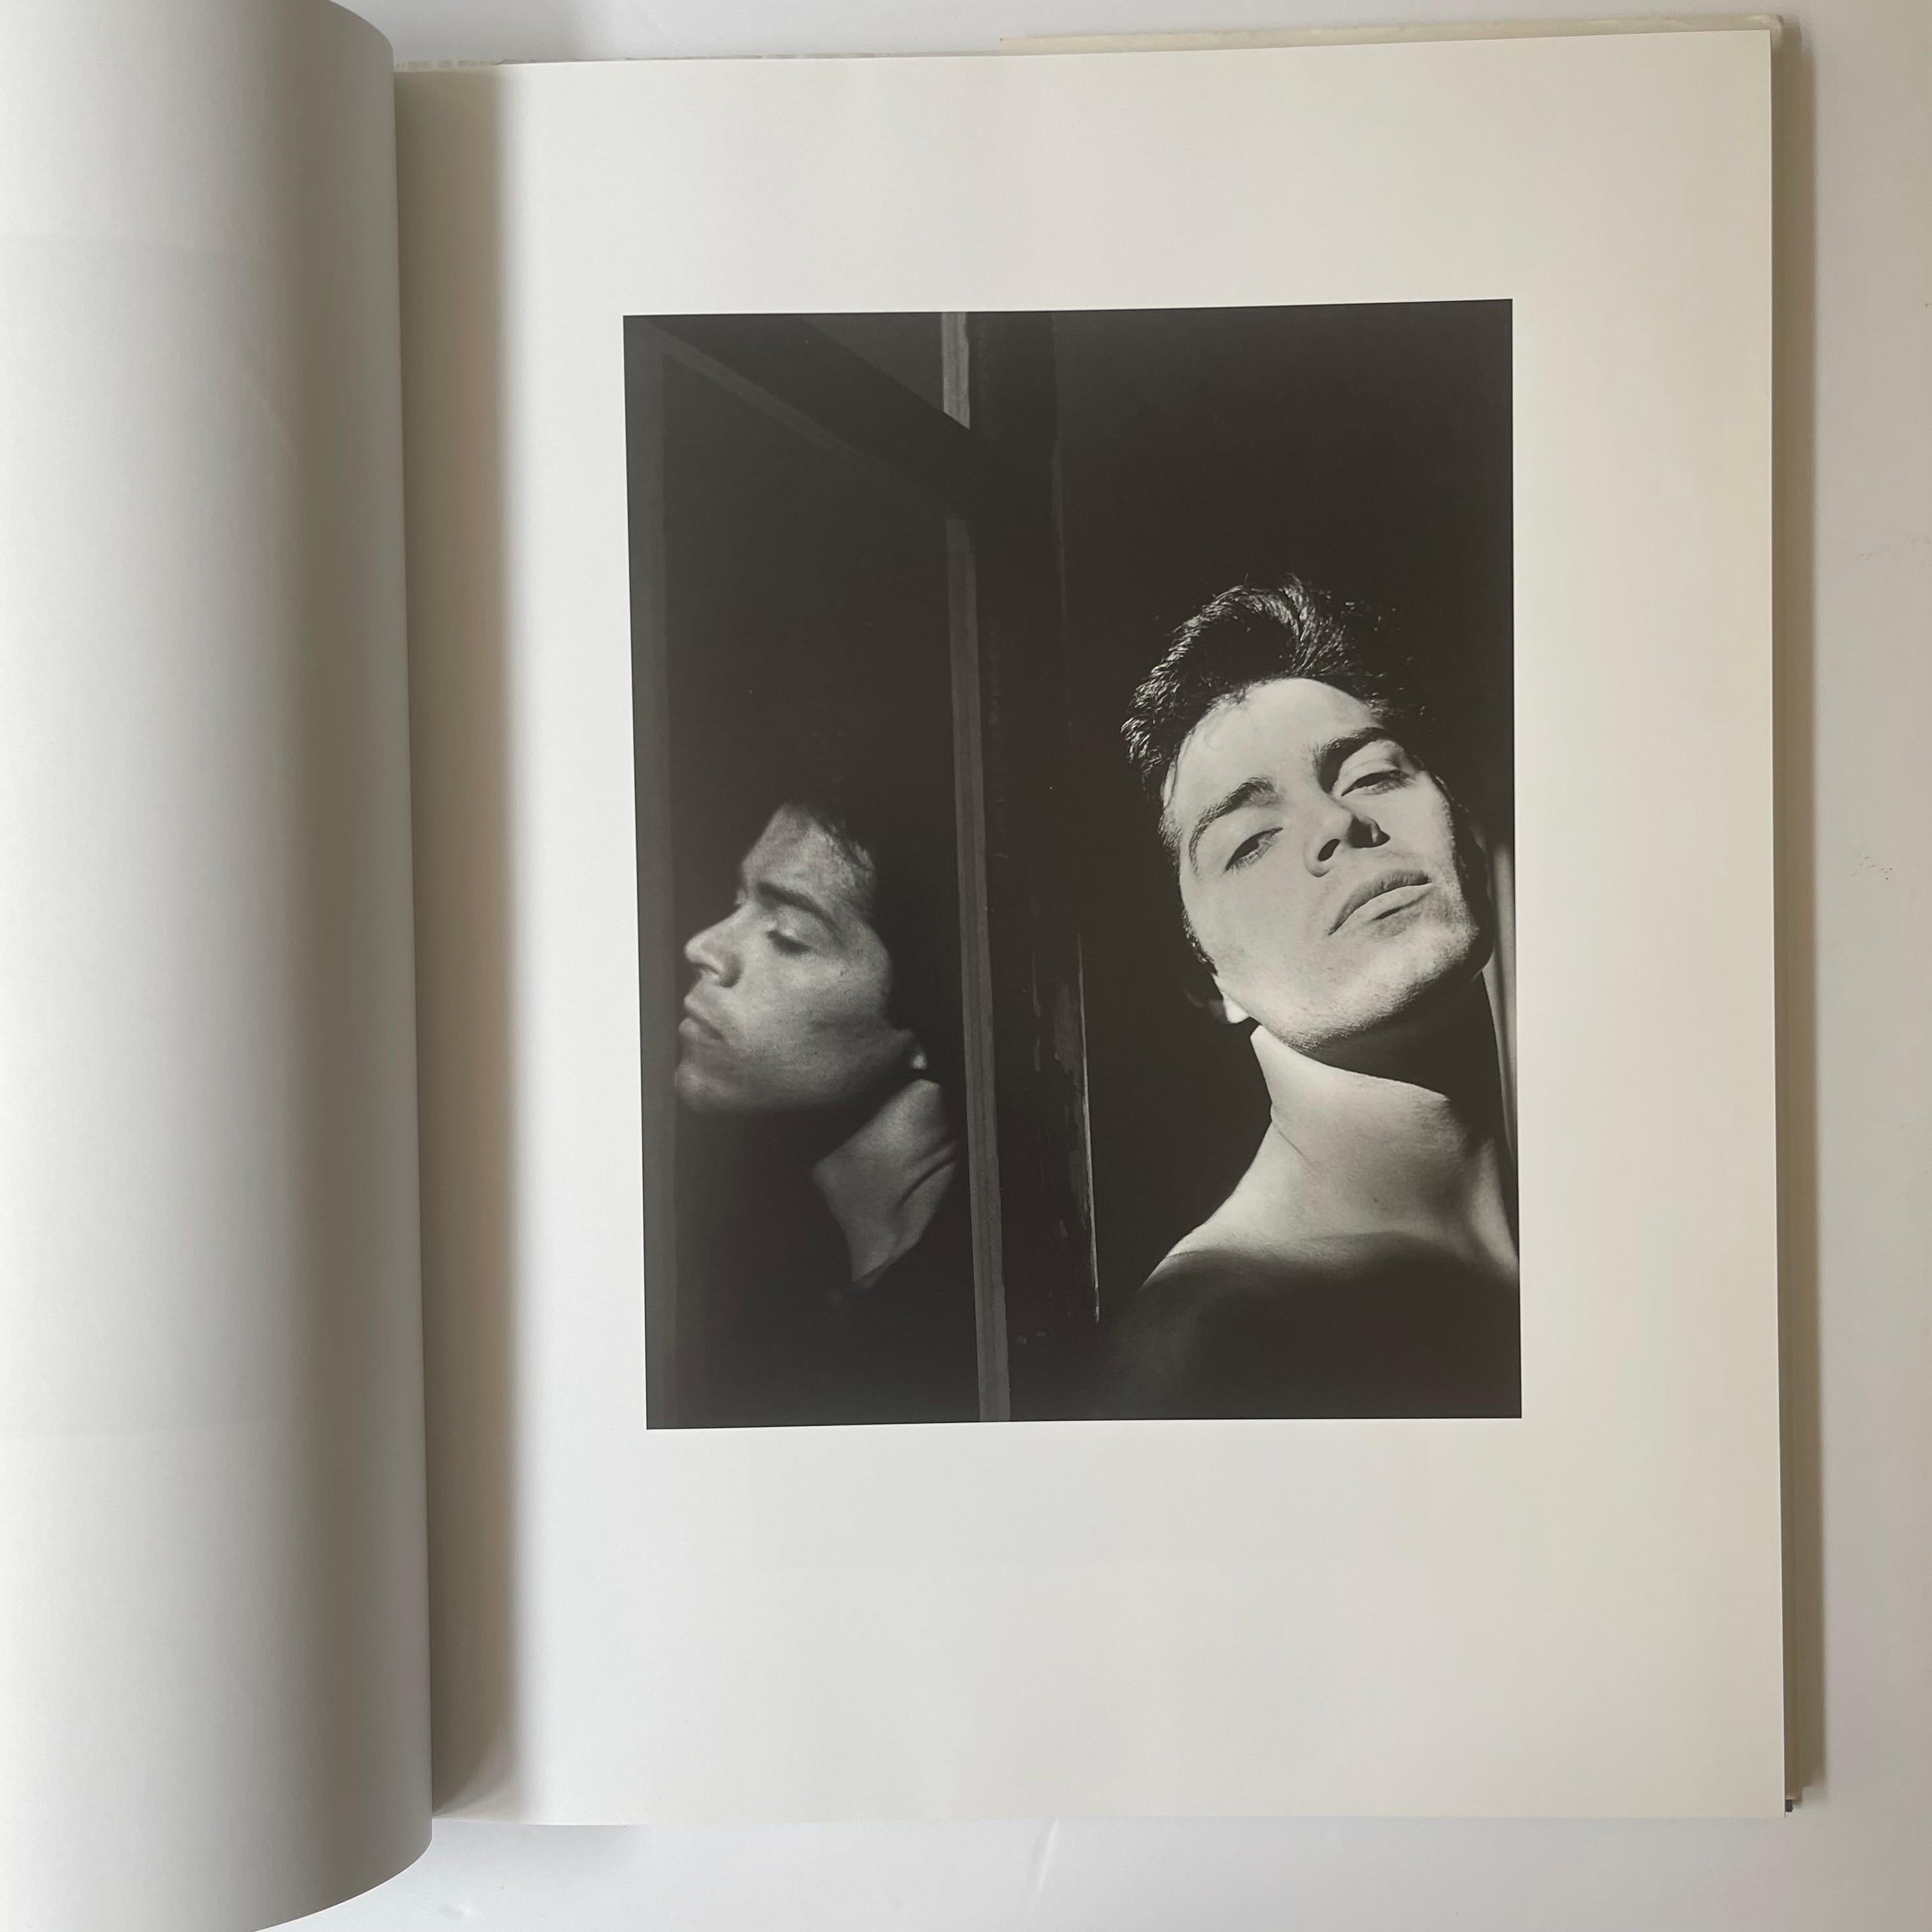 First Edition, published by Sylvester & Orphanos, Los Angeles, 2006.

Prefaced by Gore Vidal, this volume sets the beautiful and yearning, intimate, black and white erotic photographs of Stathis Orphanos alongside the sensual poems of Constantine